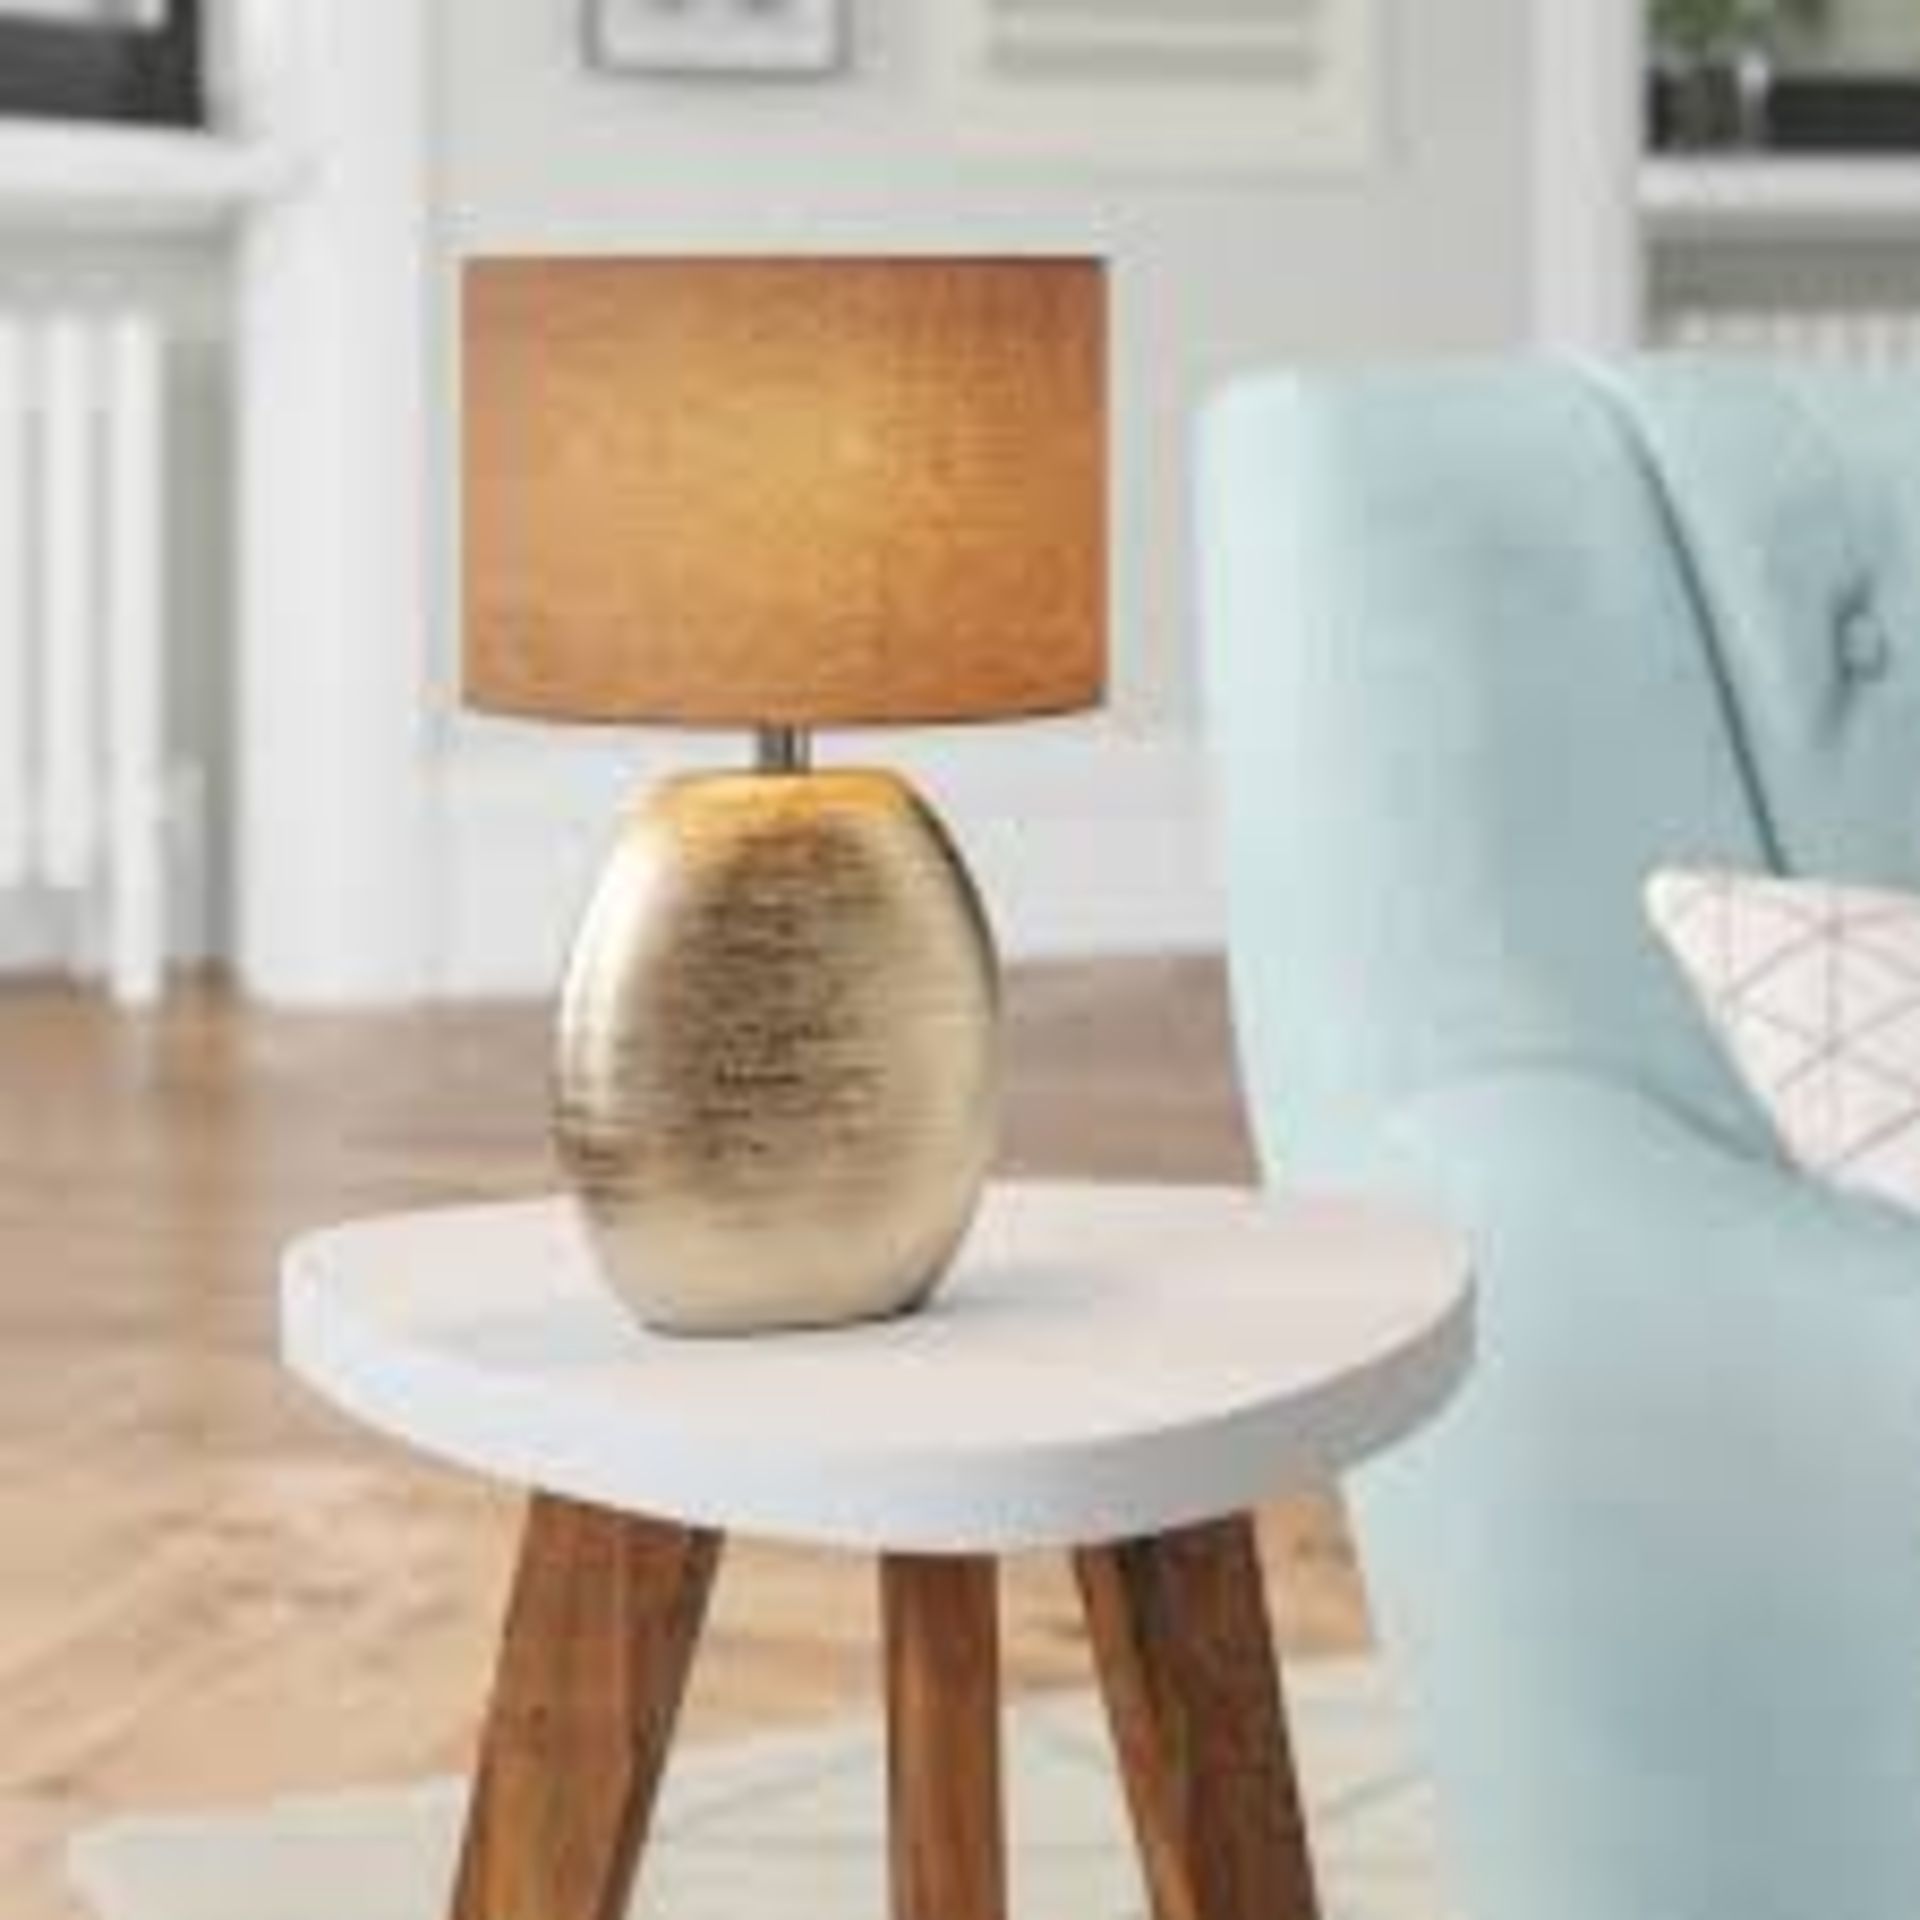 Boxed Mini Sun Bodden 29cm Table Lamps RRP £65 (18801) (Pictures Are For Illustration Purposes Only)